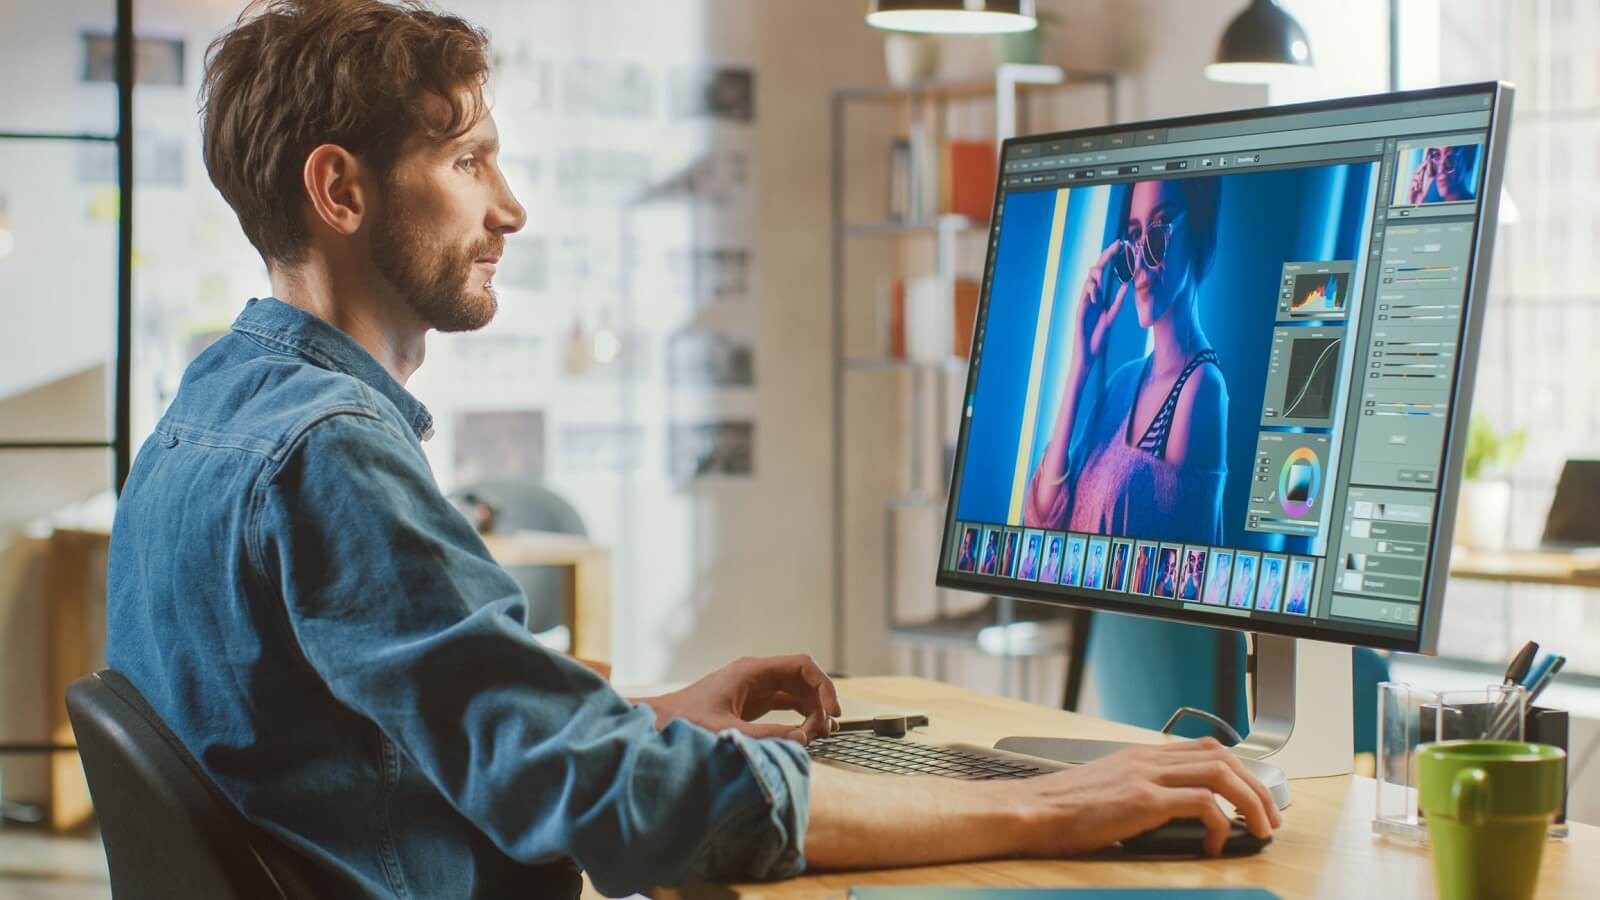 Best Photo Editing Software for Photographers or Photo Editors